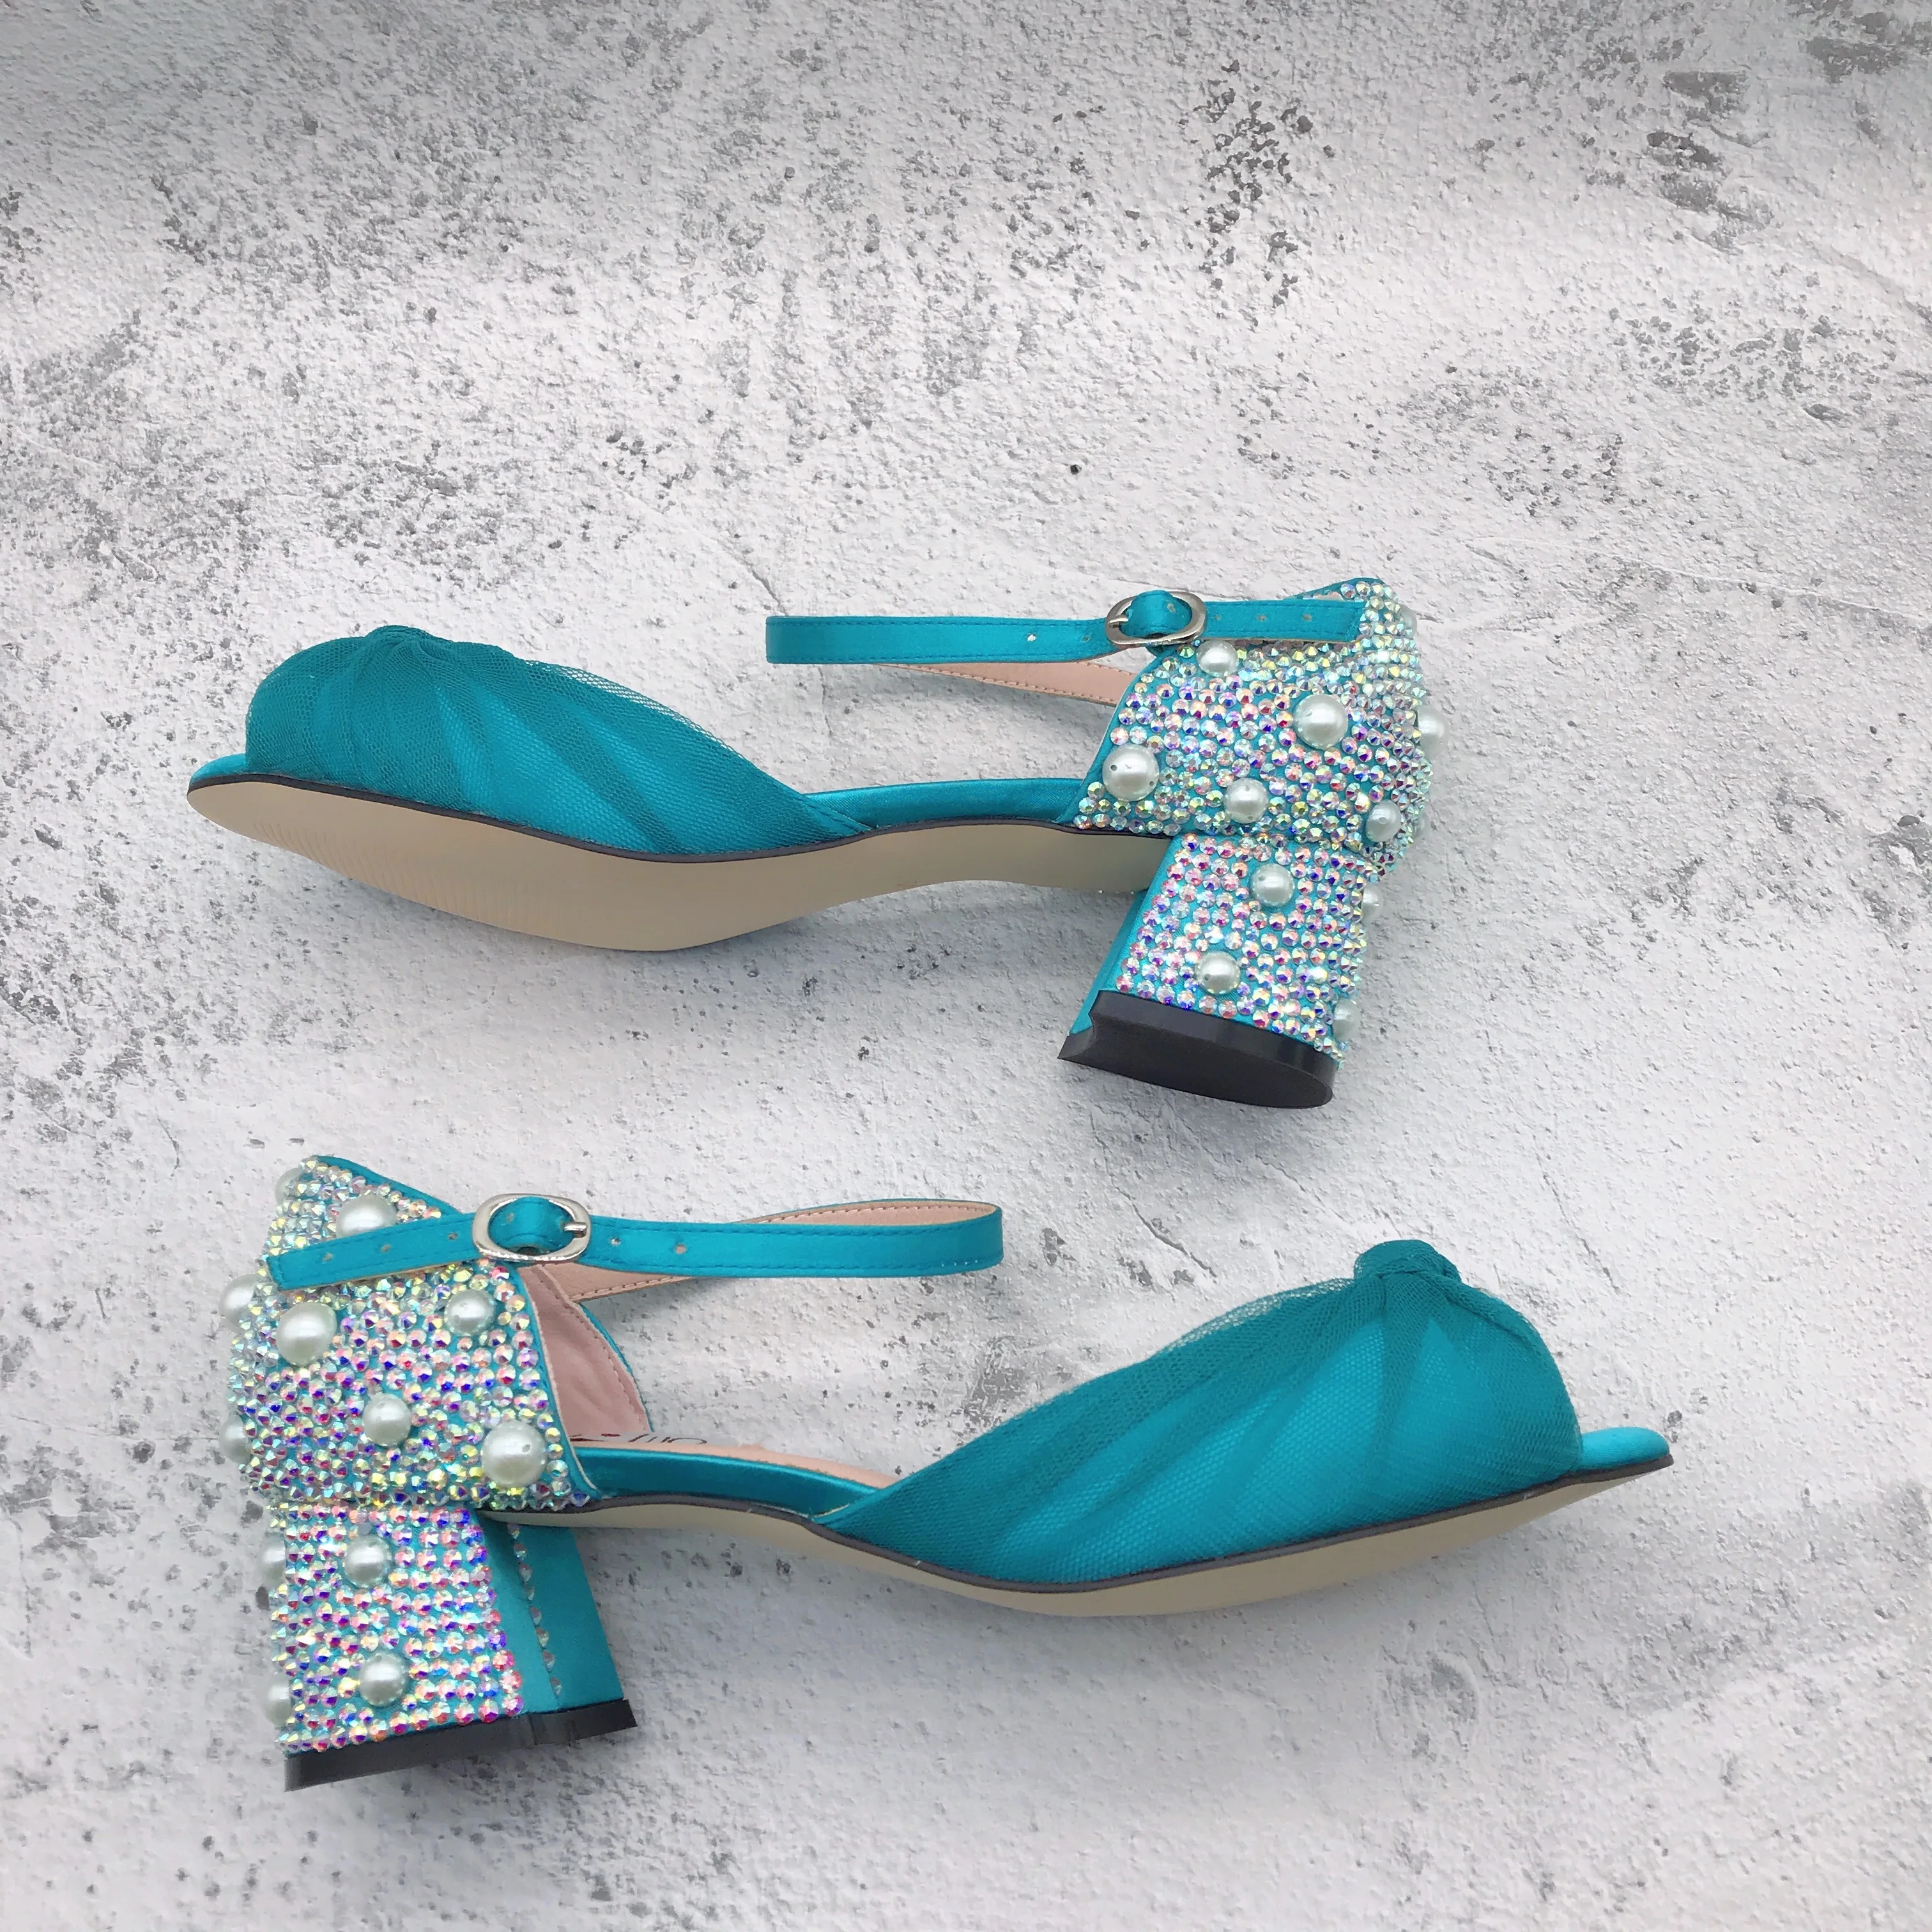 Buy SIZE 7 Shoes Teal & Black Medium Heel, Peep Toe Slingbacks, Something  Blue Shoes Formal Evening Satin Pumps, Comfortable Heel, Pageant, Prom  Online in India - Etsy